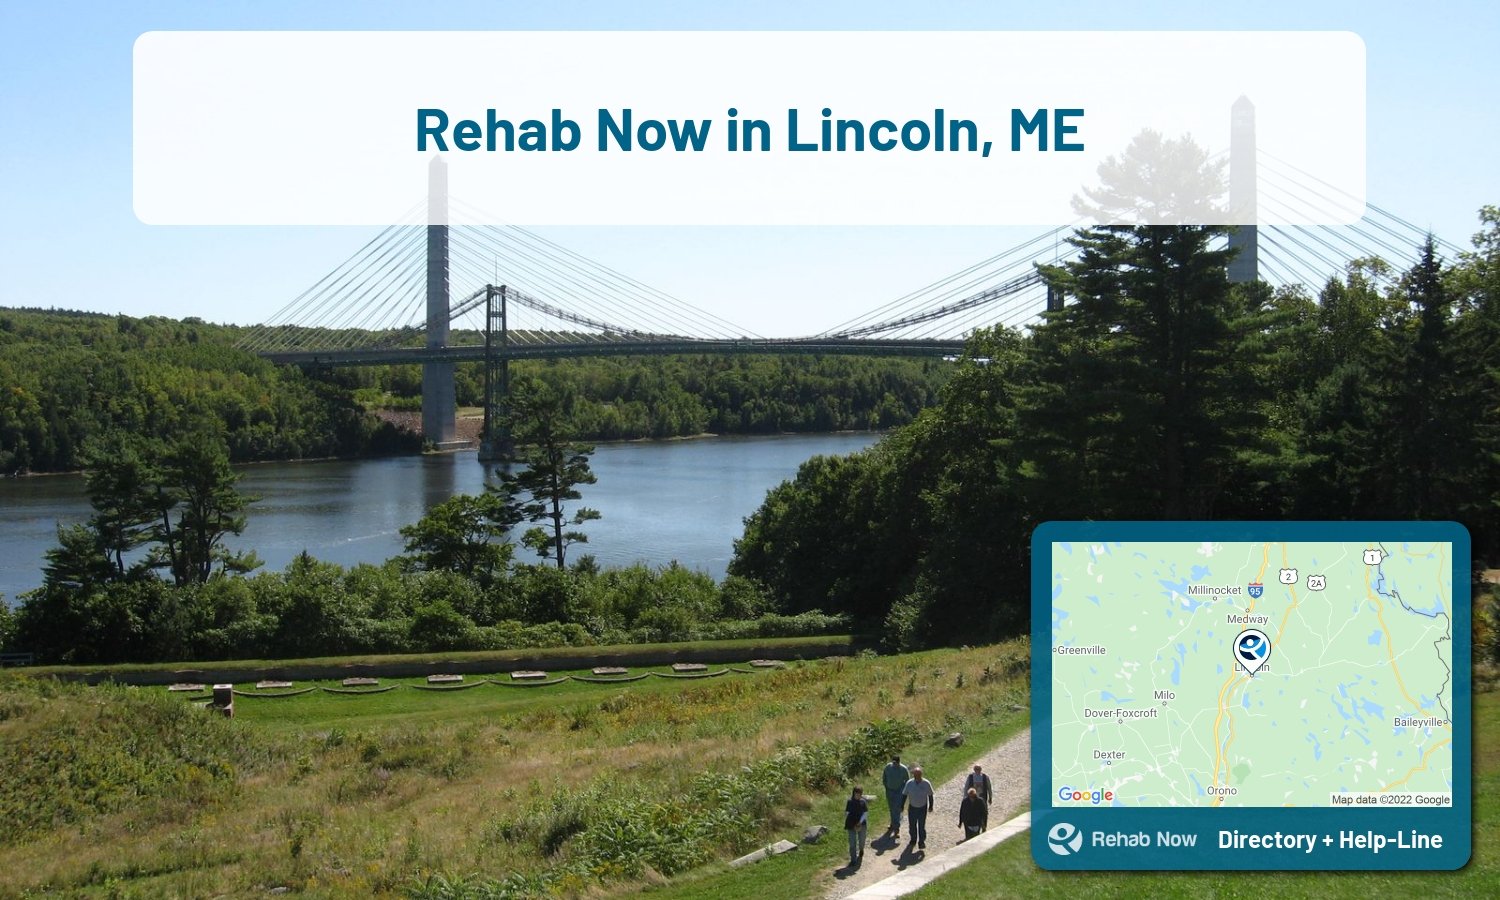 Lincoln, ME Treatment Centers. Find drug rehab in Lincoln, Maine, or detox and treatment programs. Get the right help now!